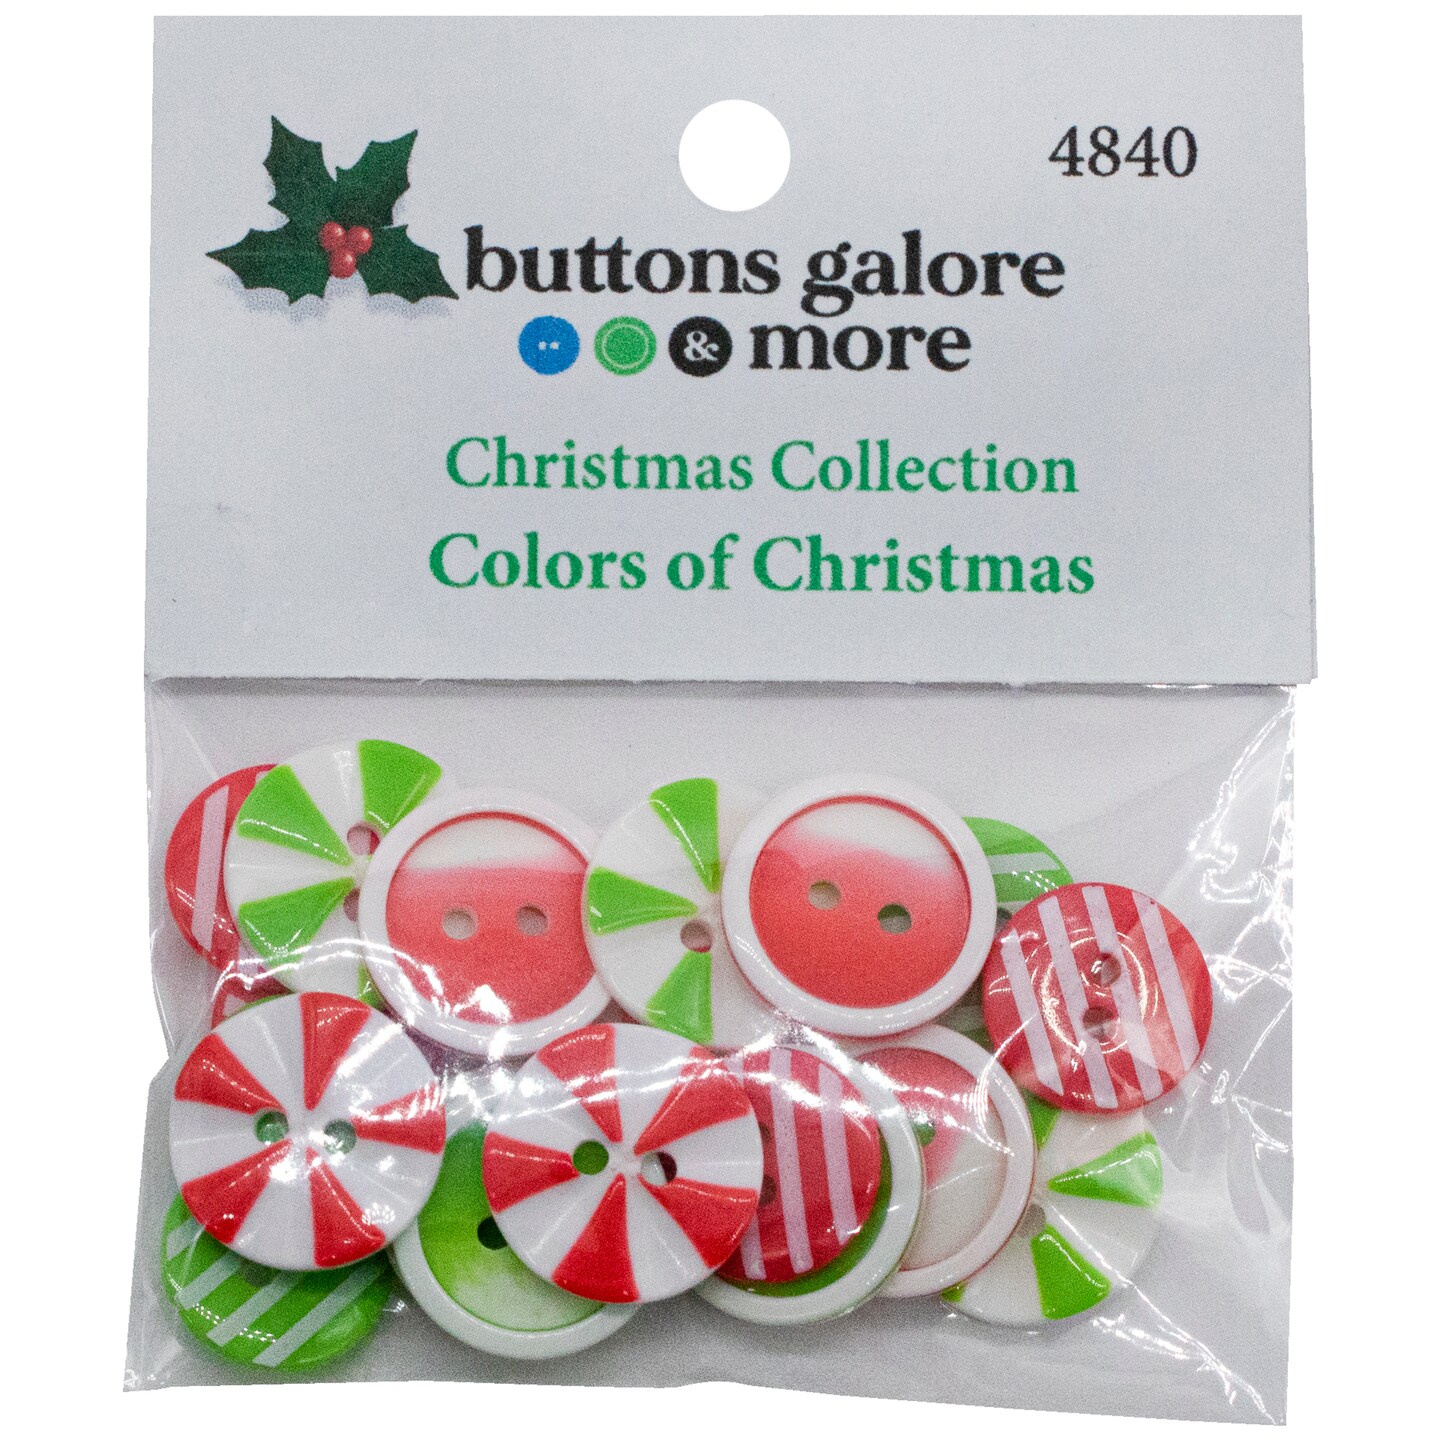 Buttons Galore Colors of Christmas Buttons for Sewing Crafts Scrapbooks DIY Projects - 3 Packs of Buttons 48 Buttons&#x2026;